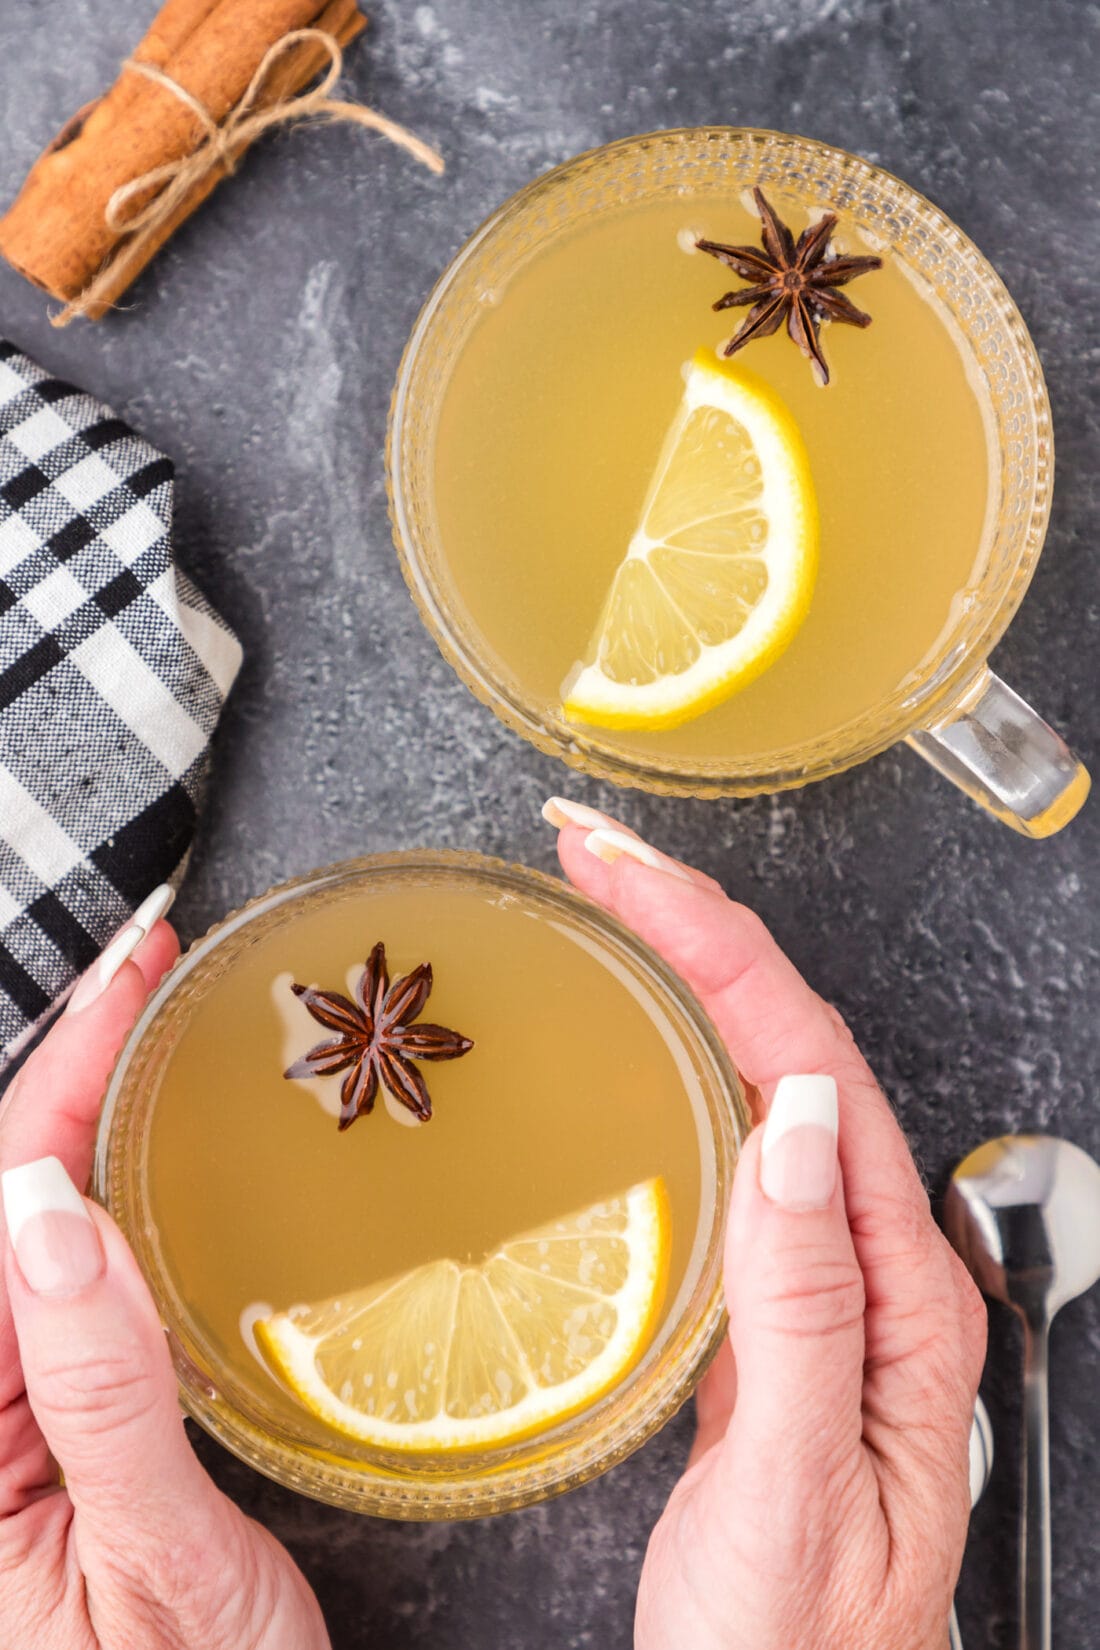 Hands holding a Hot Toddy next to another Hot Toddy